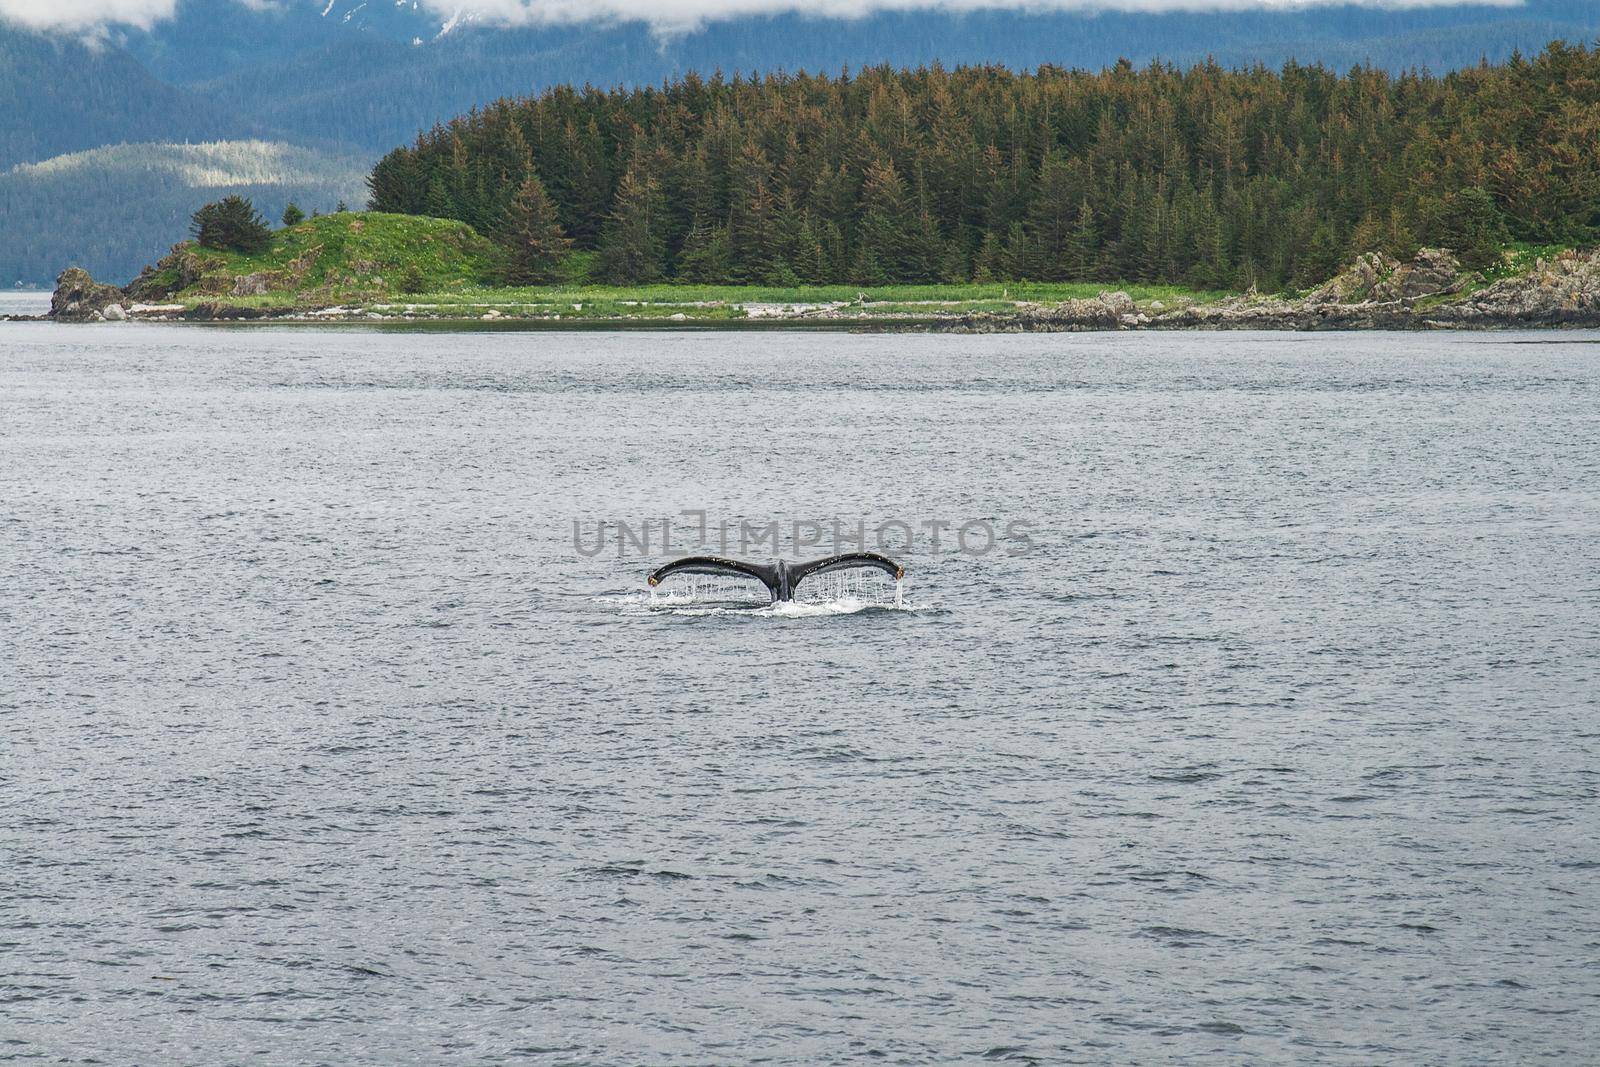 Humpback Whale Diving in front of the Trees in Alaska by wondry